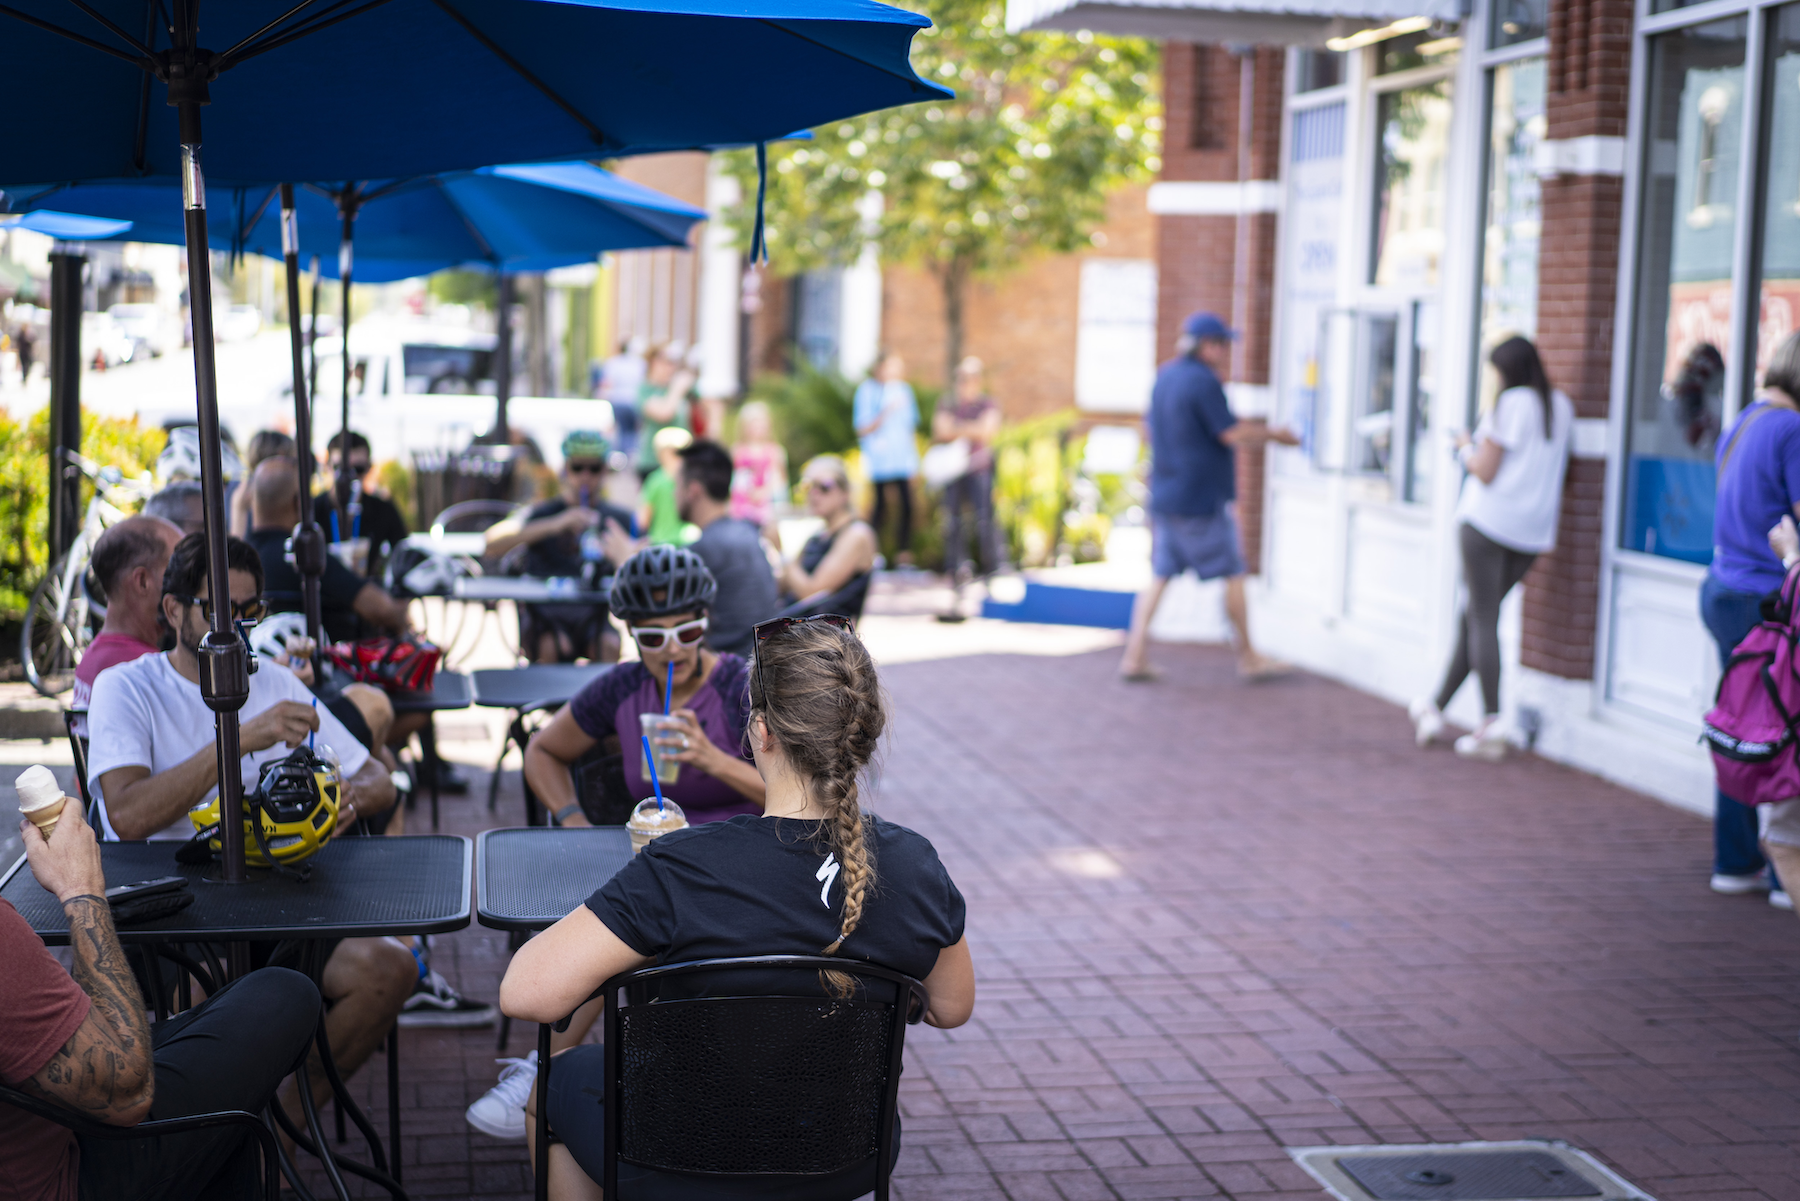 Four people enjoy and soda and ice cream at the Spark Cafe on the Downtown Bentonville square.